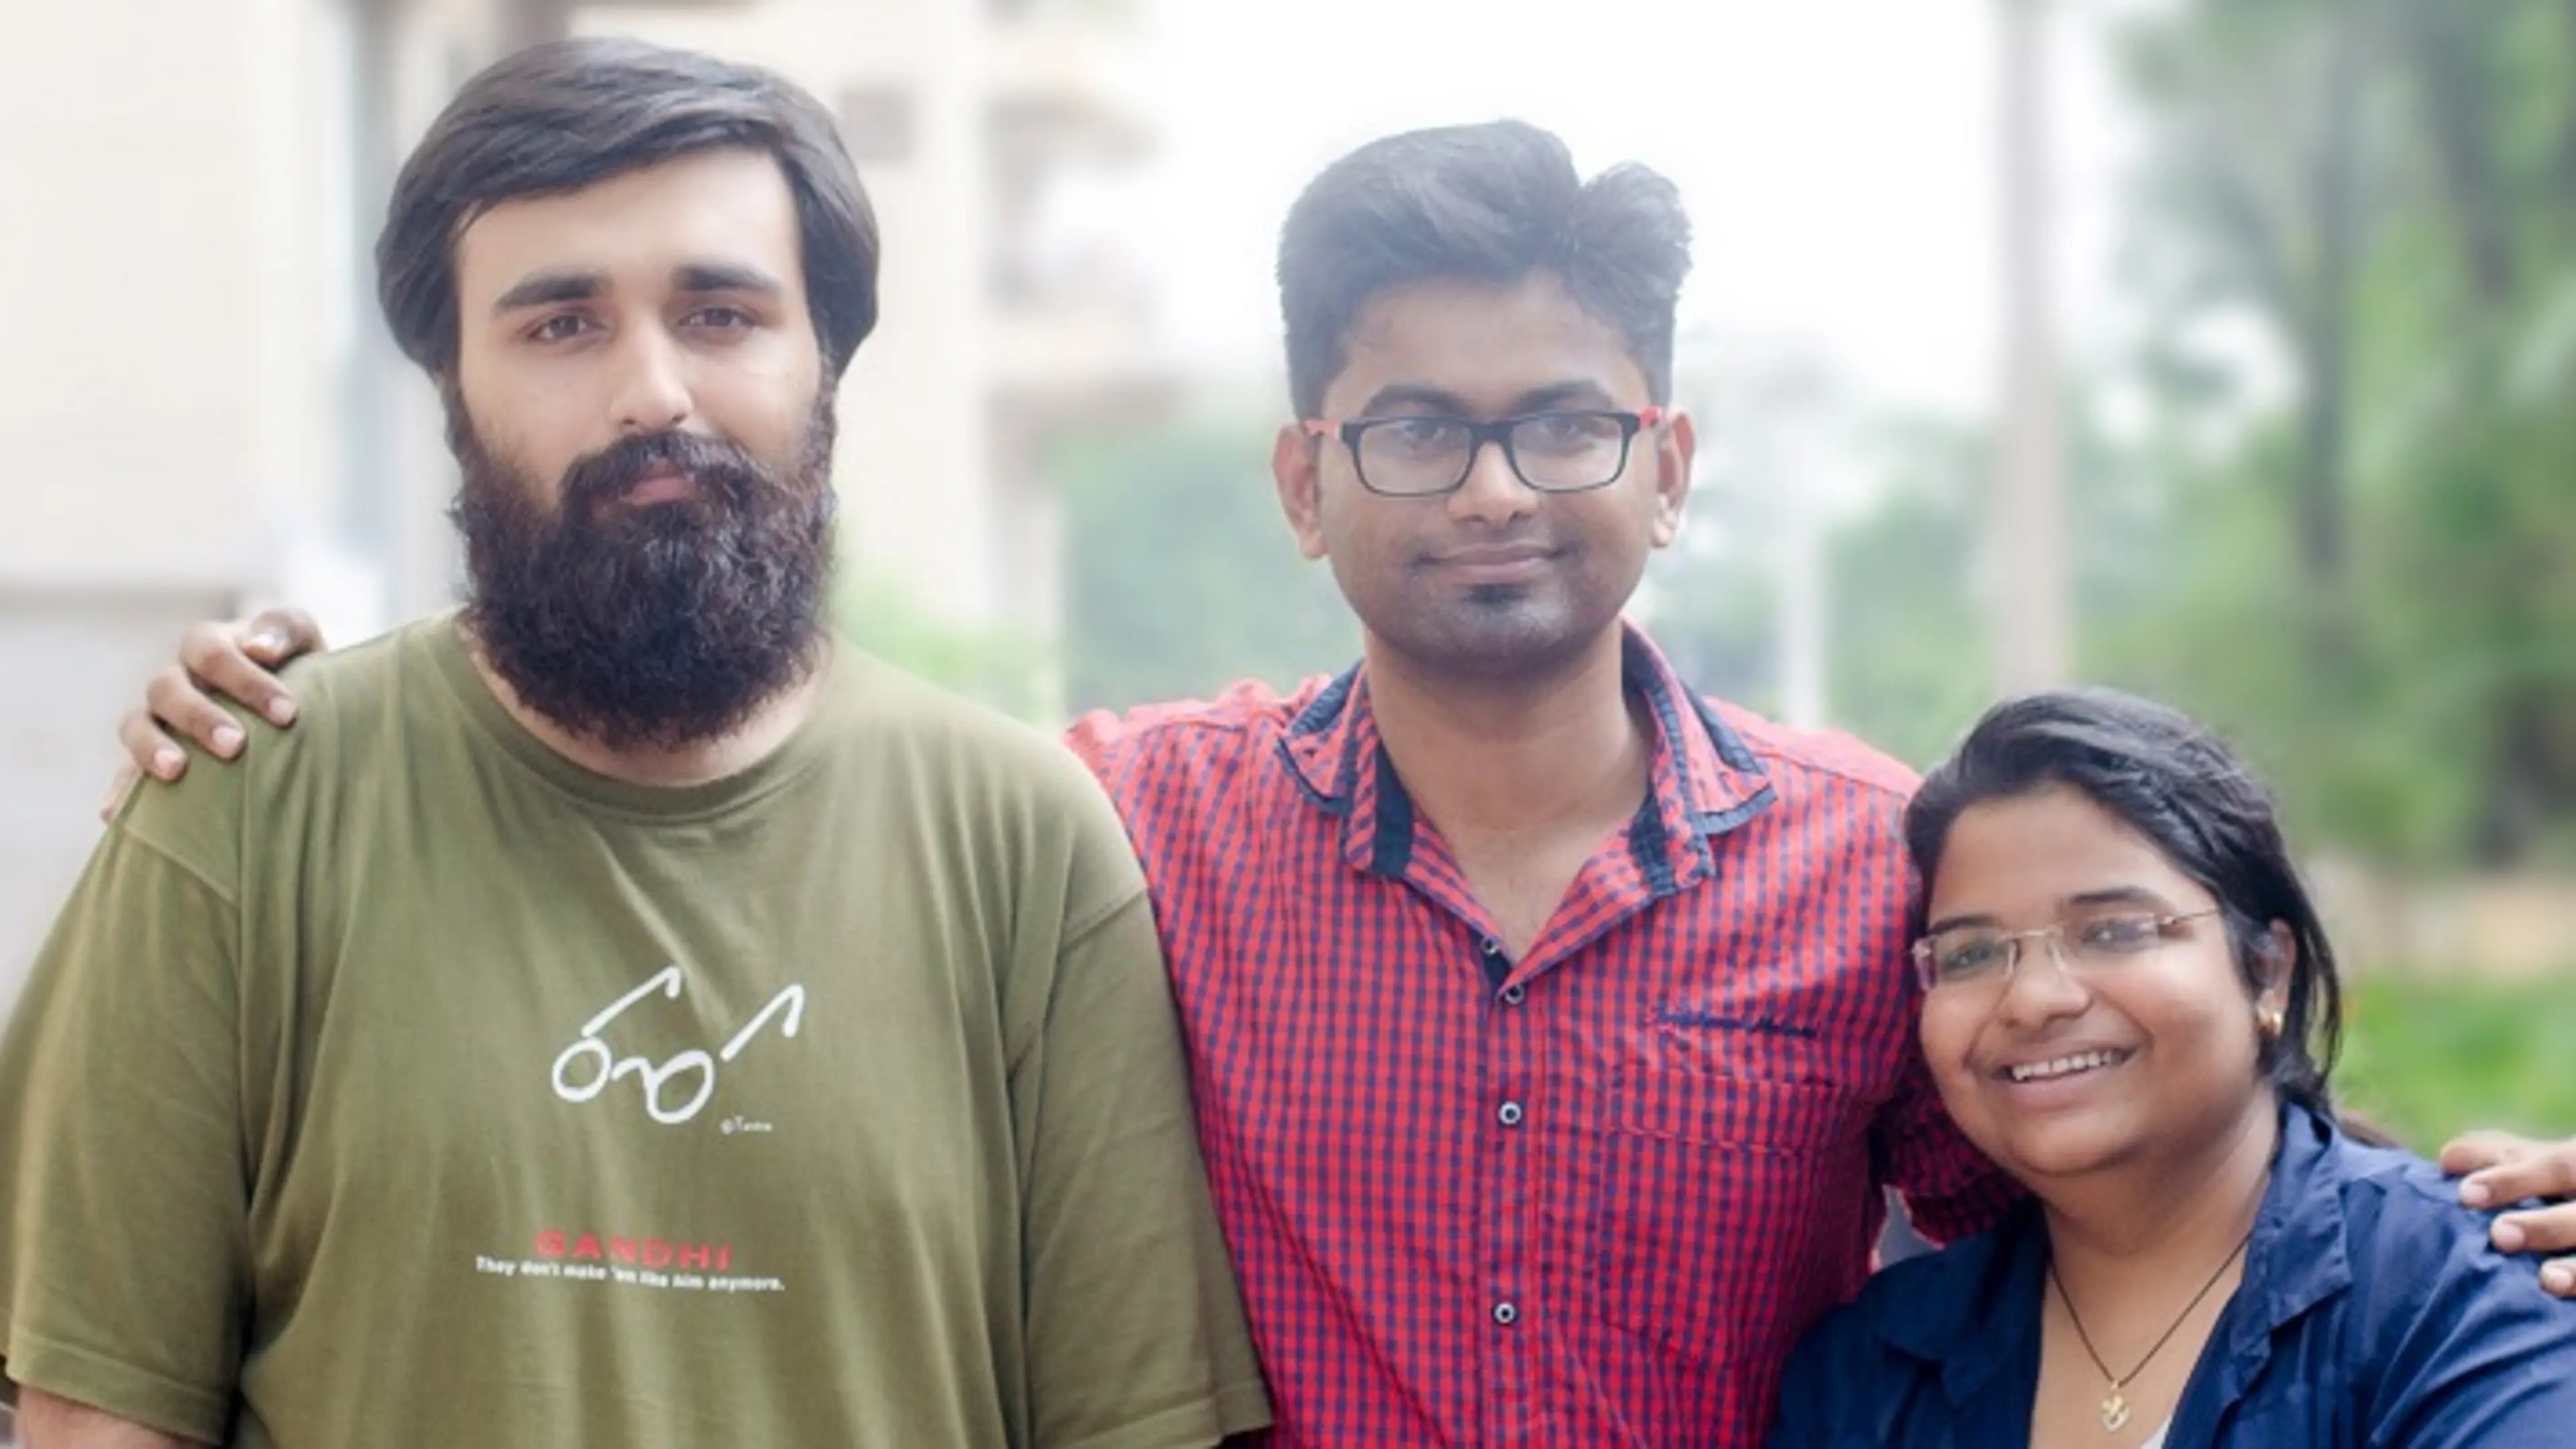 Breaking a Limca record, these 23-year-olds are now trying to organise the photography market in India